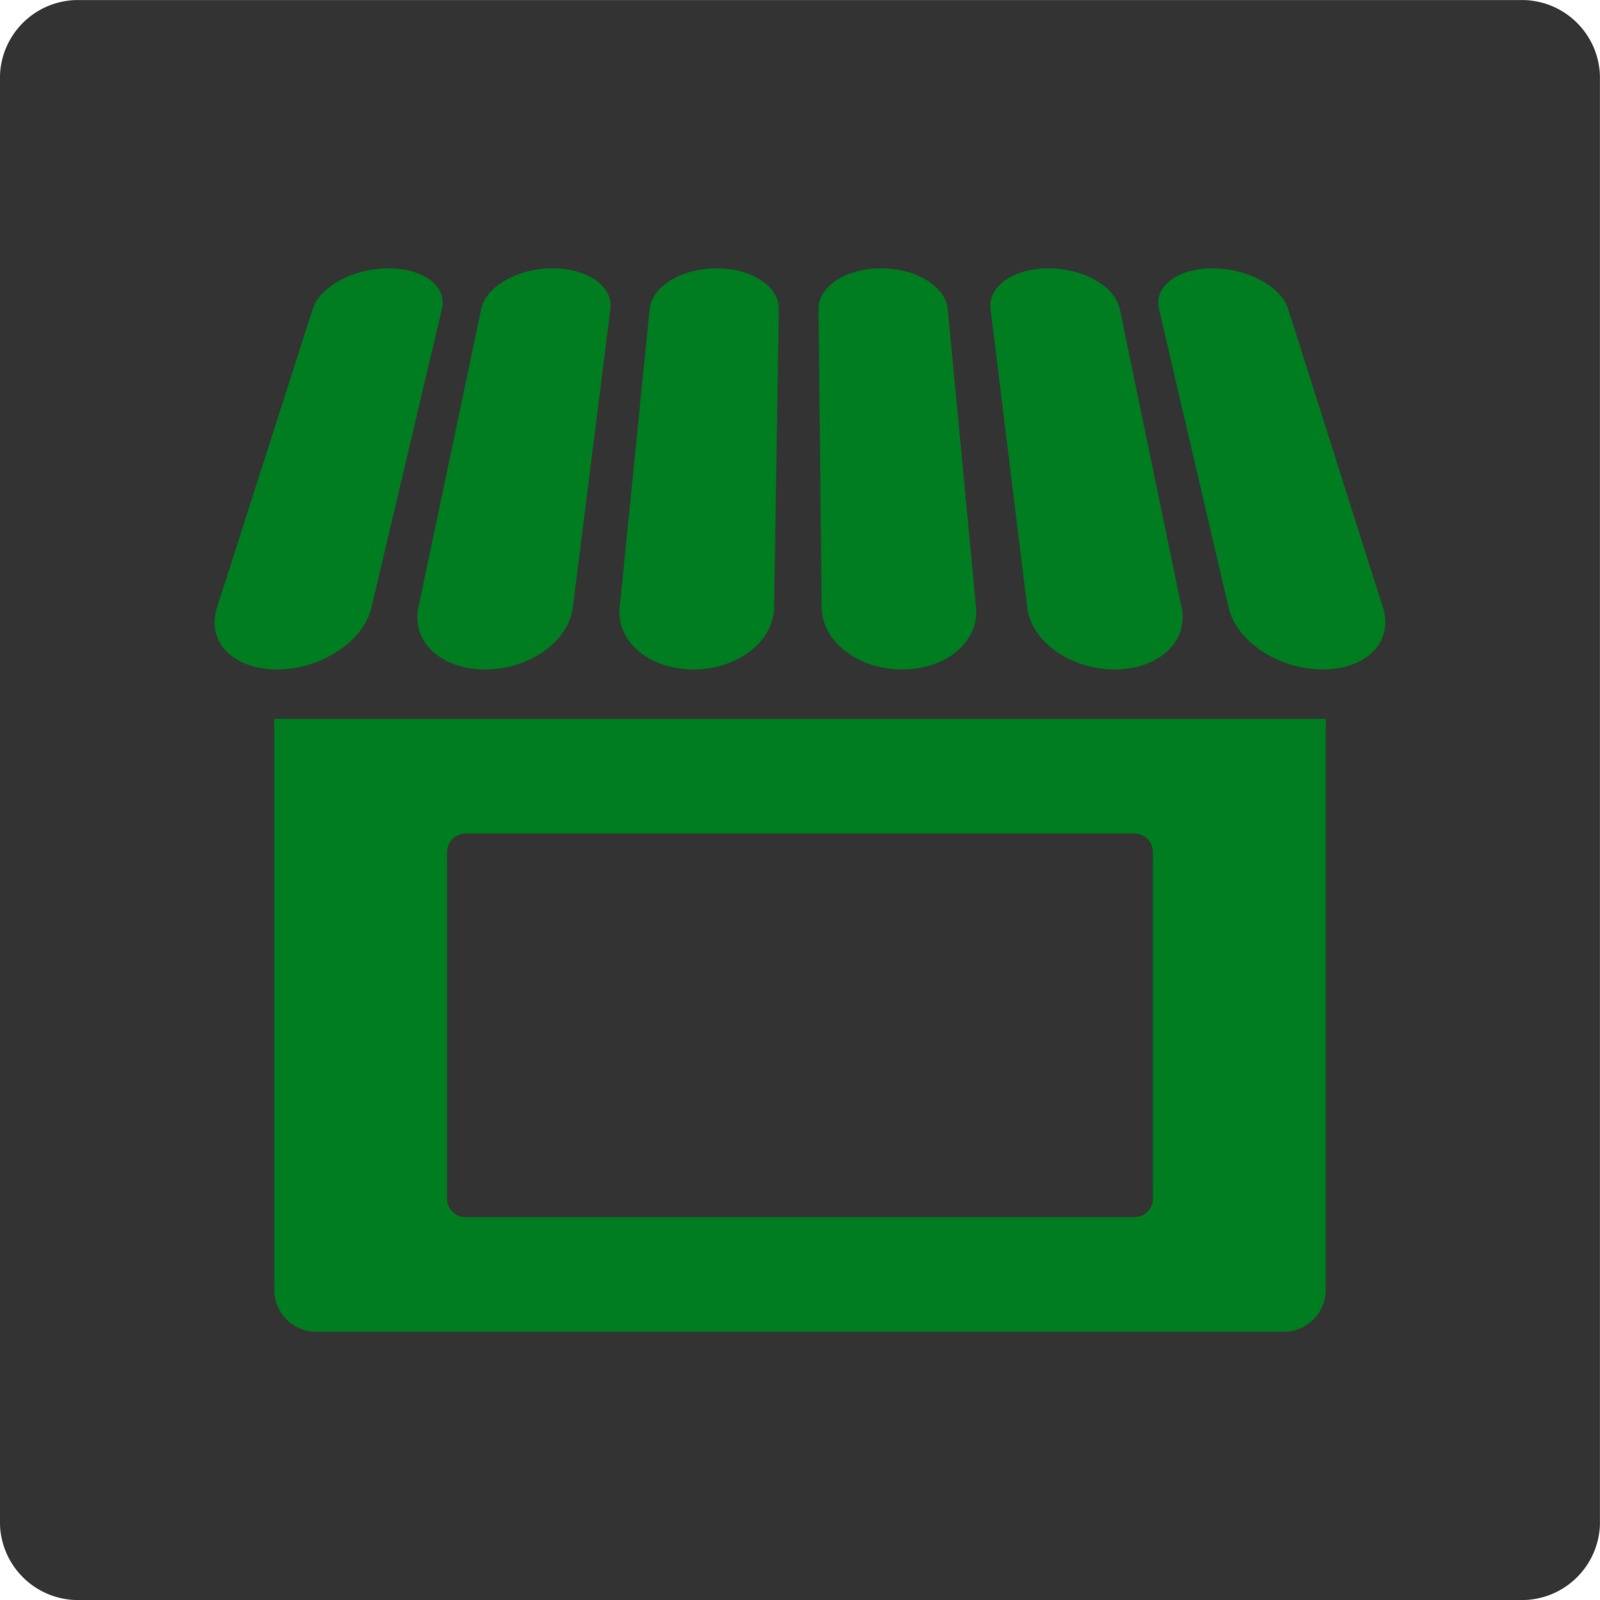 Shop icon. This flat rounded square button uses green and gray colors and isolated on a white background.